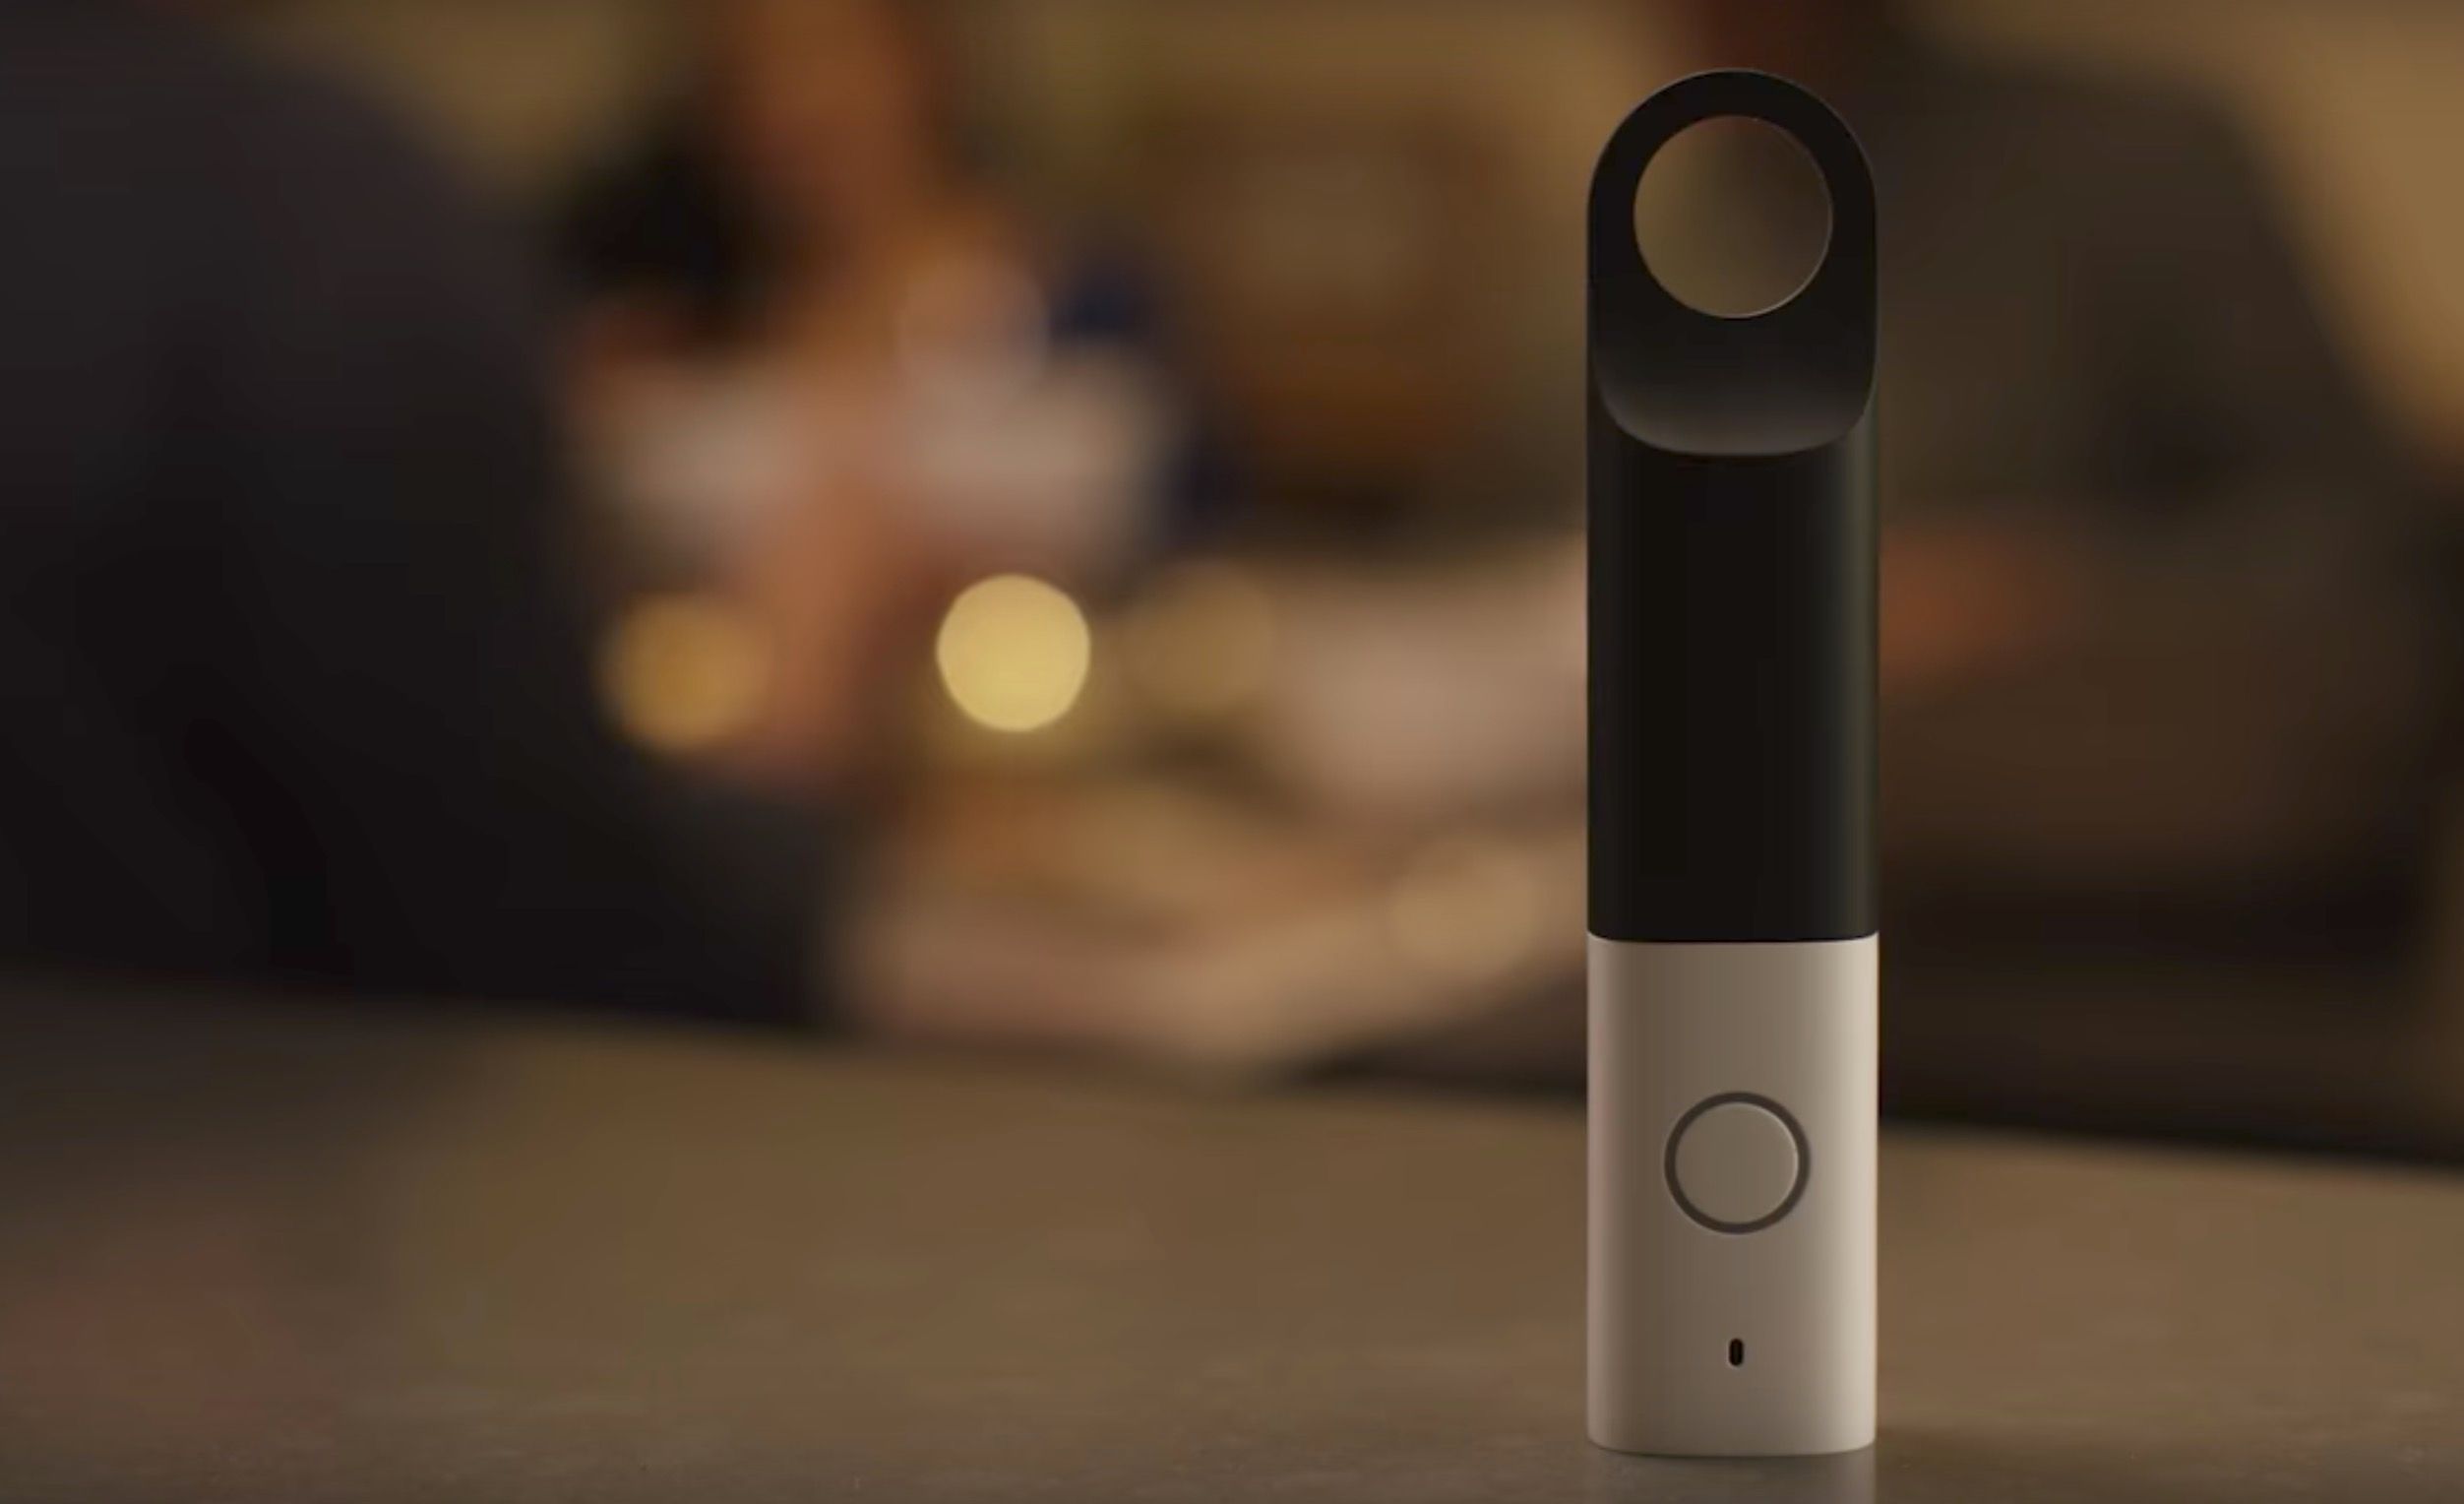 amazon s voice ordering dash wand is now almost free for prime users image 1